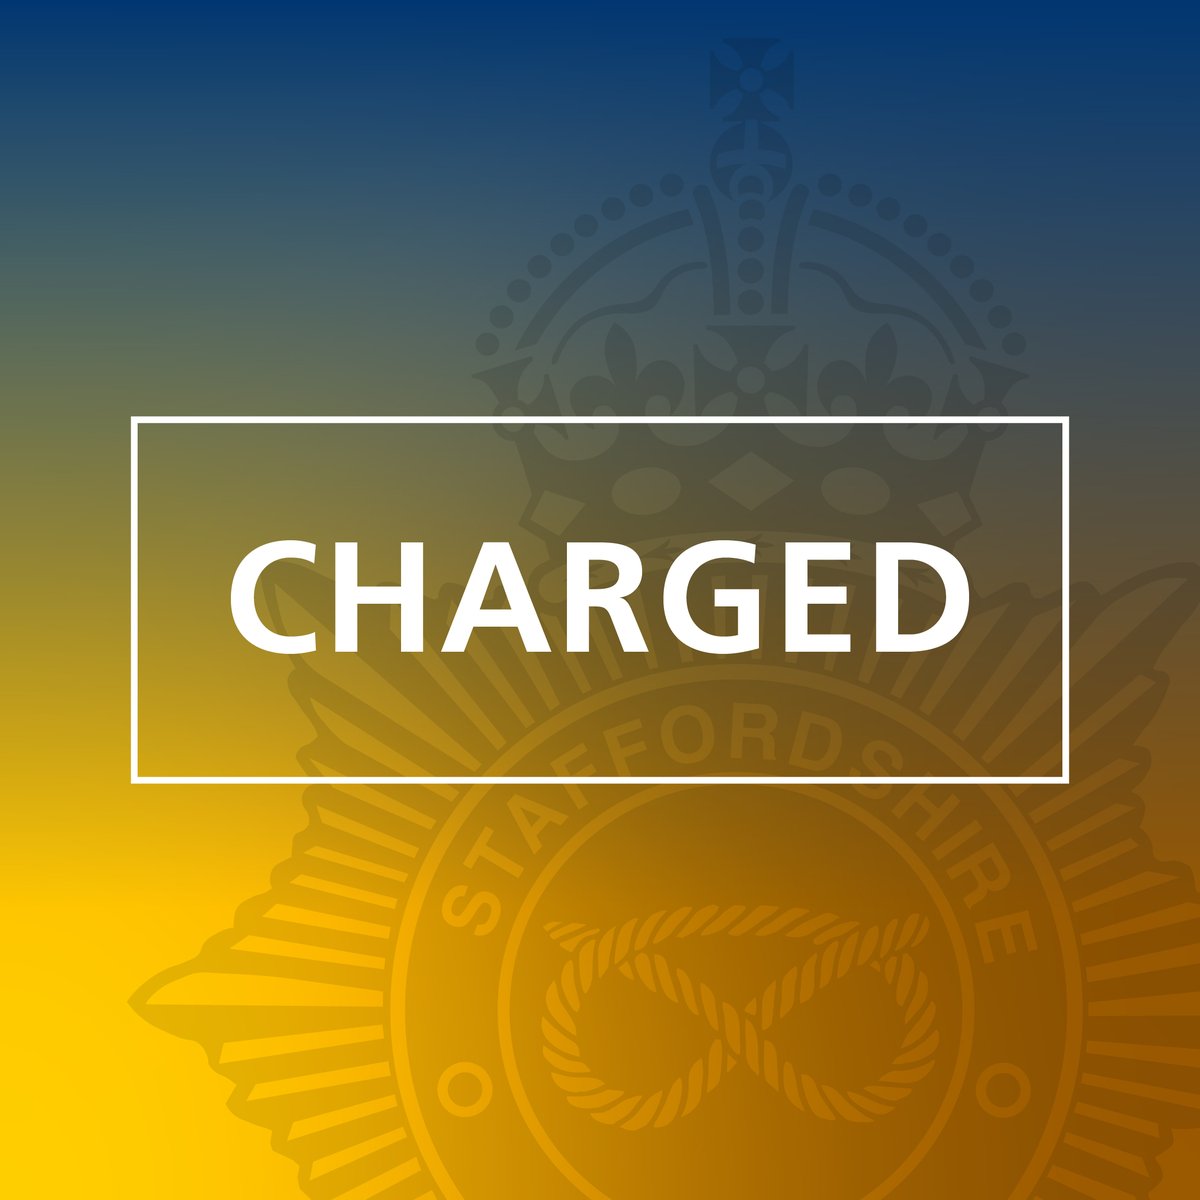 A man has been charged with rape following an investigation into a recent incident in Staffordshire. Read more here: orlo.uk/9YDok